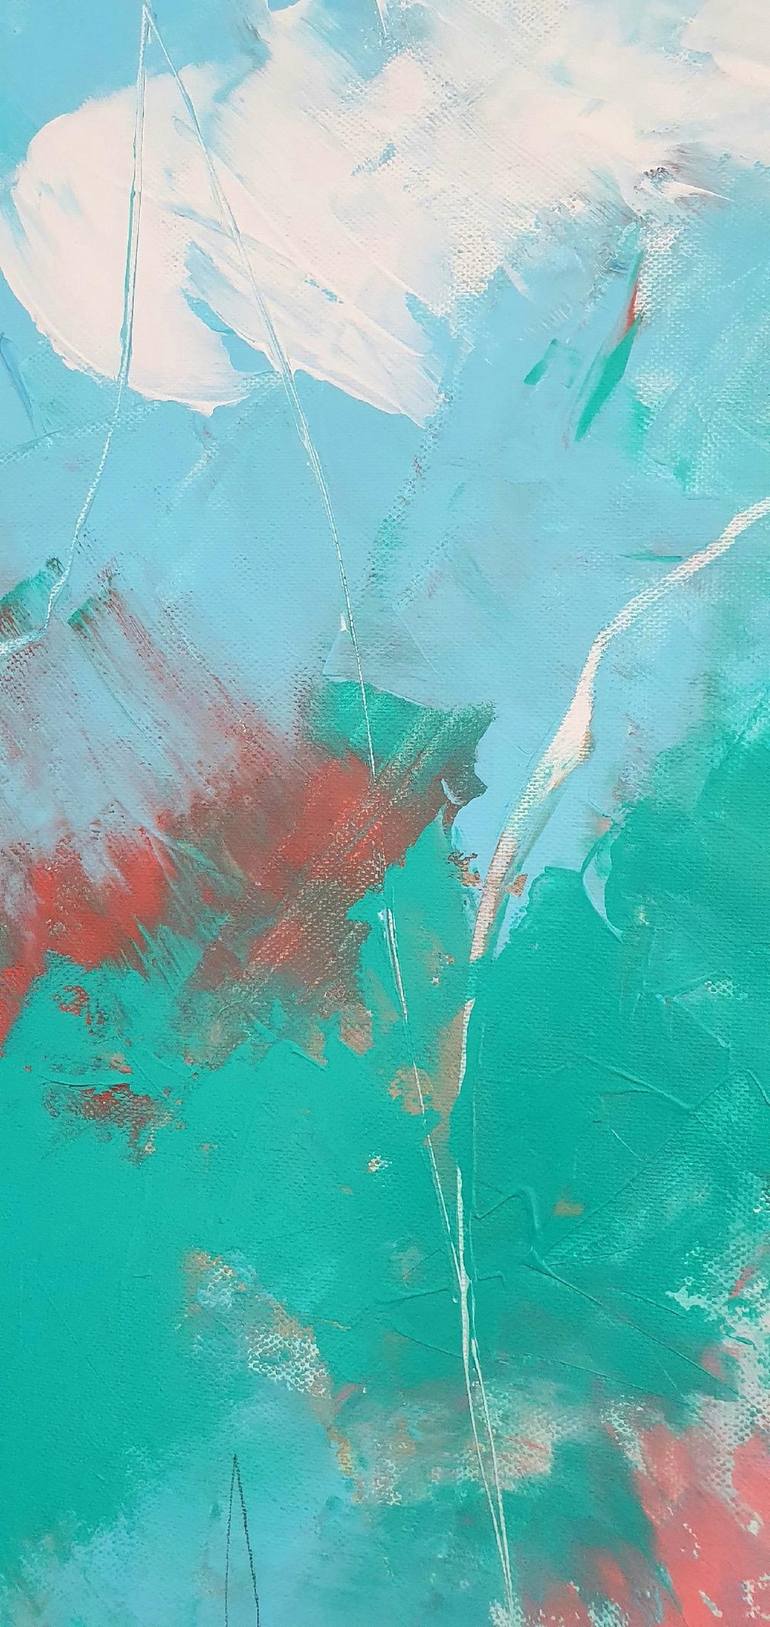 Original Modern Abstract Painting by Suely Blot